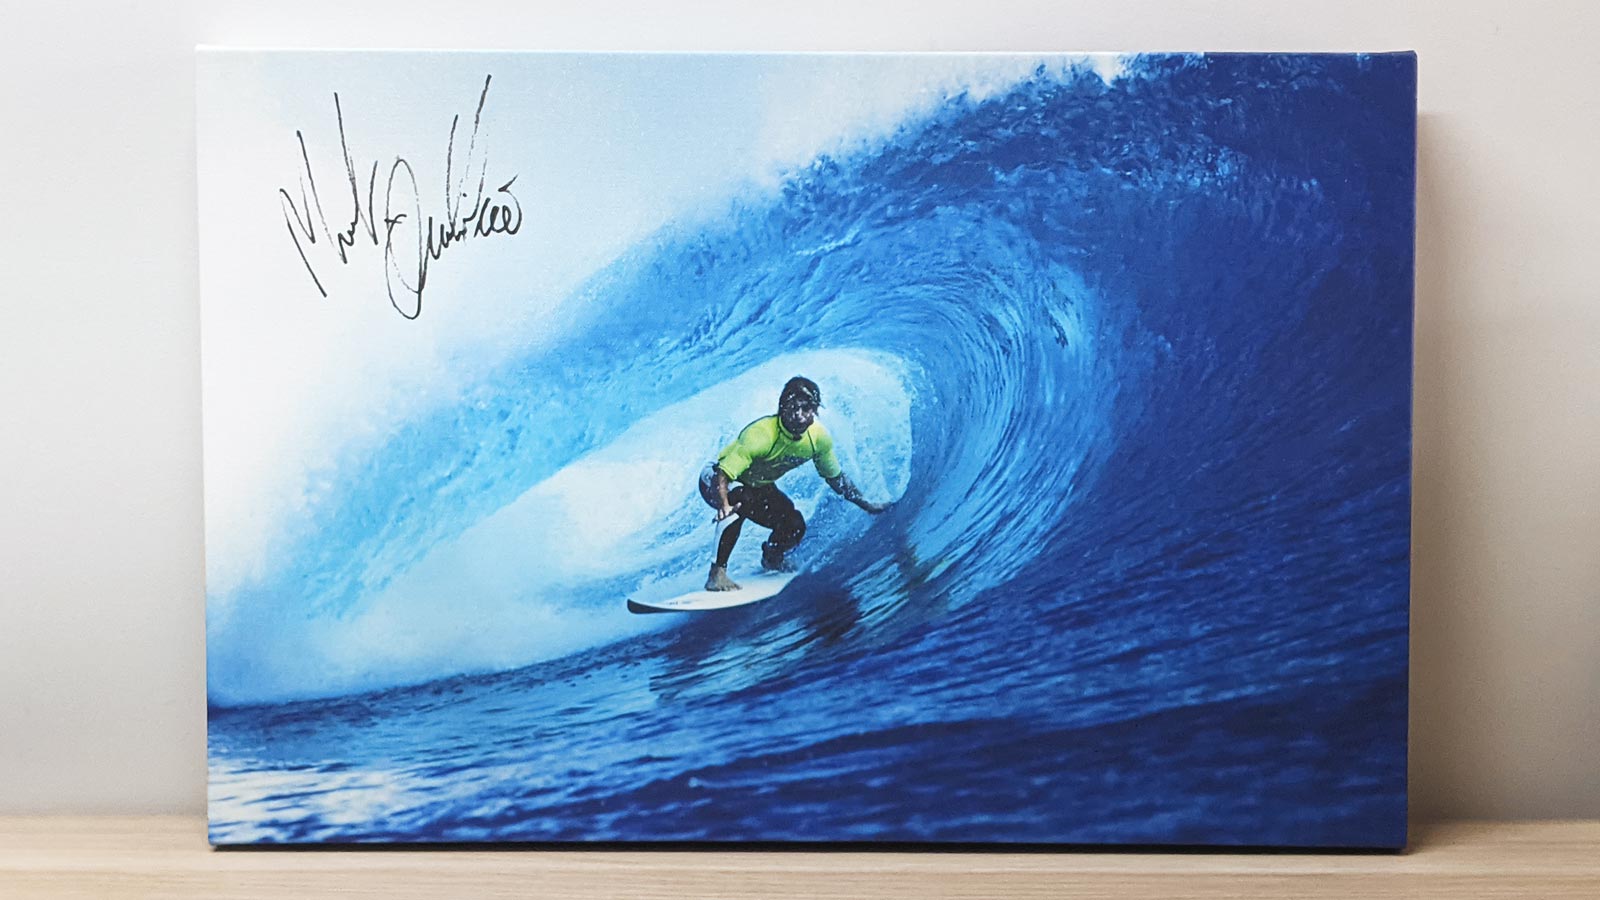 Load video: Signed canvas print featuring surfer Mark Occhilupo